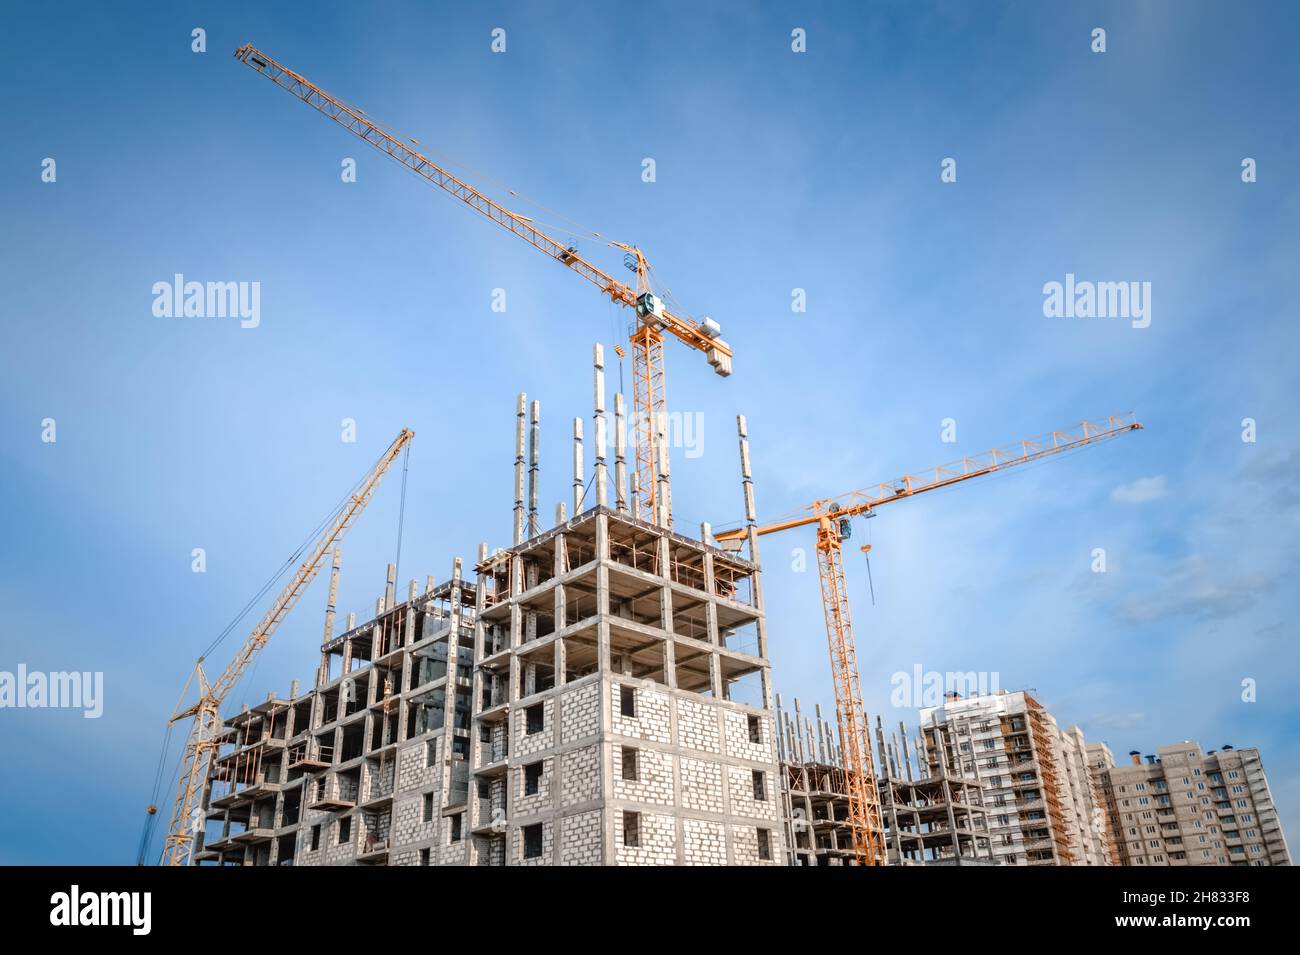 Construction of highrise building and hoisting tower cranes Stock Photo